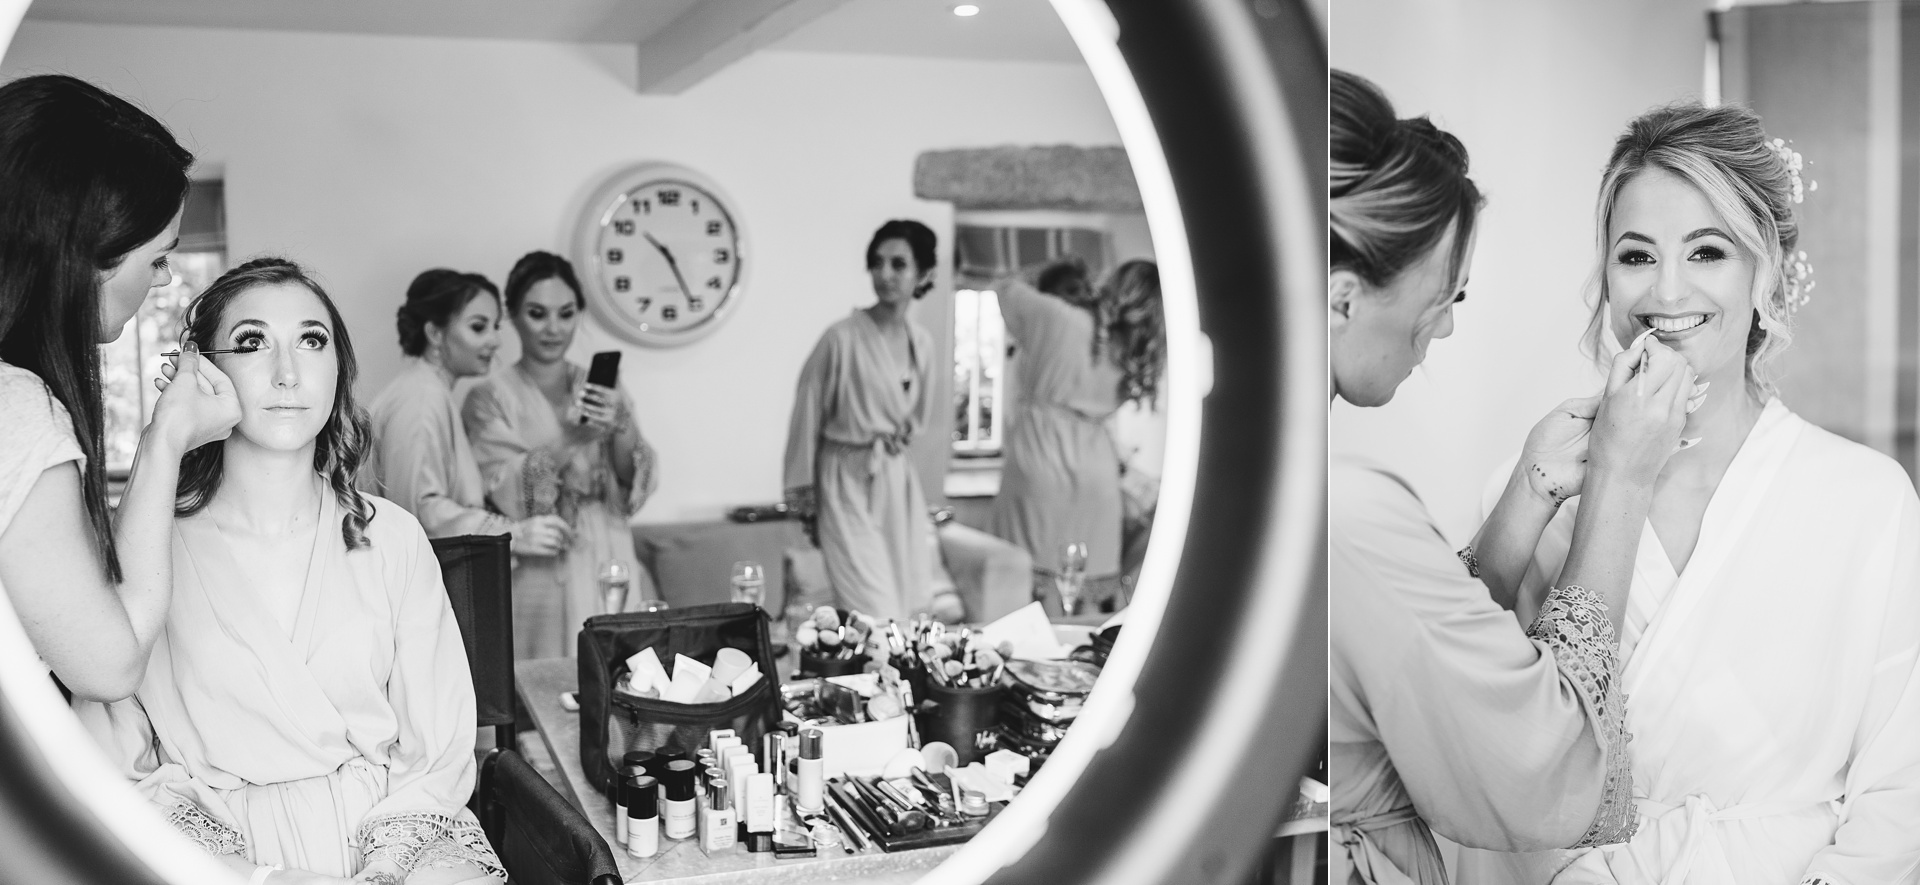 Bride and bridesmaids getting ready for a wedding